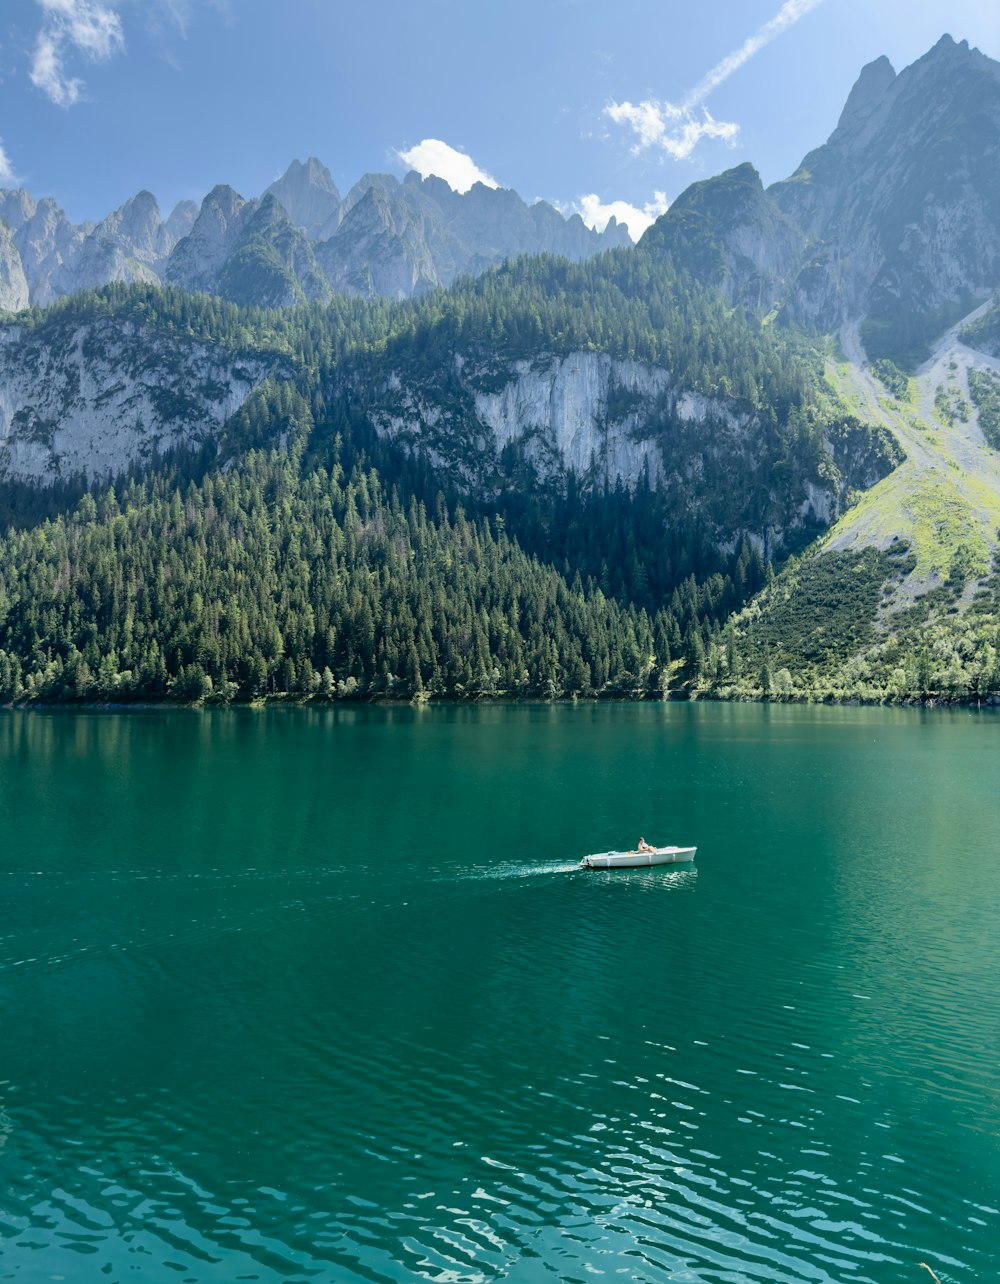 a boat in the middle of a lake with mountains in the background